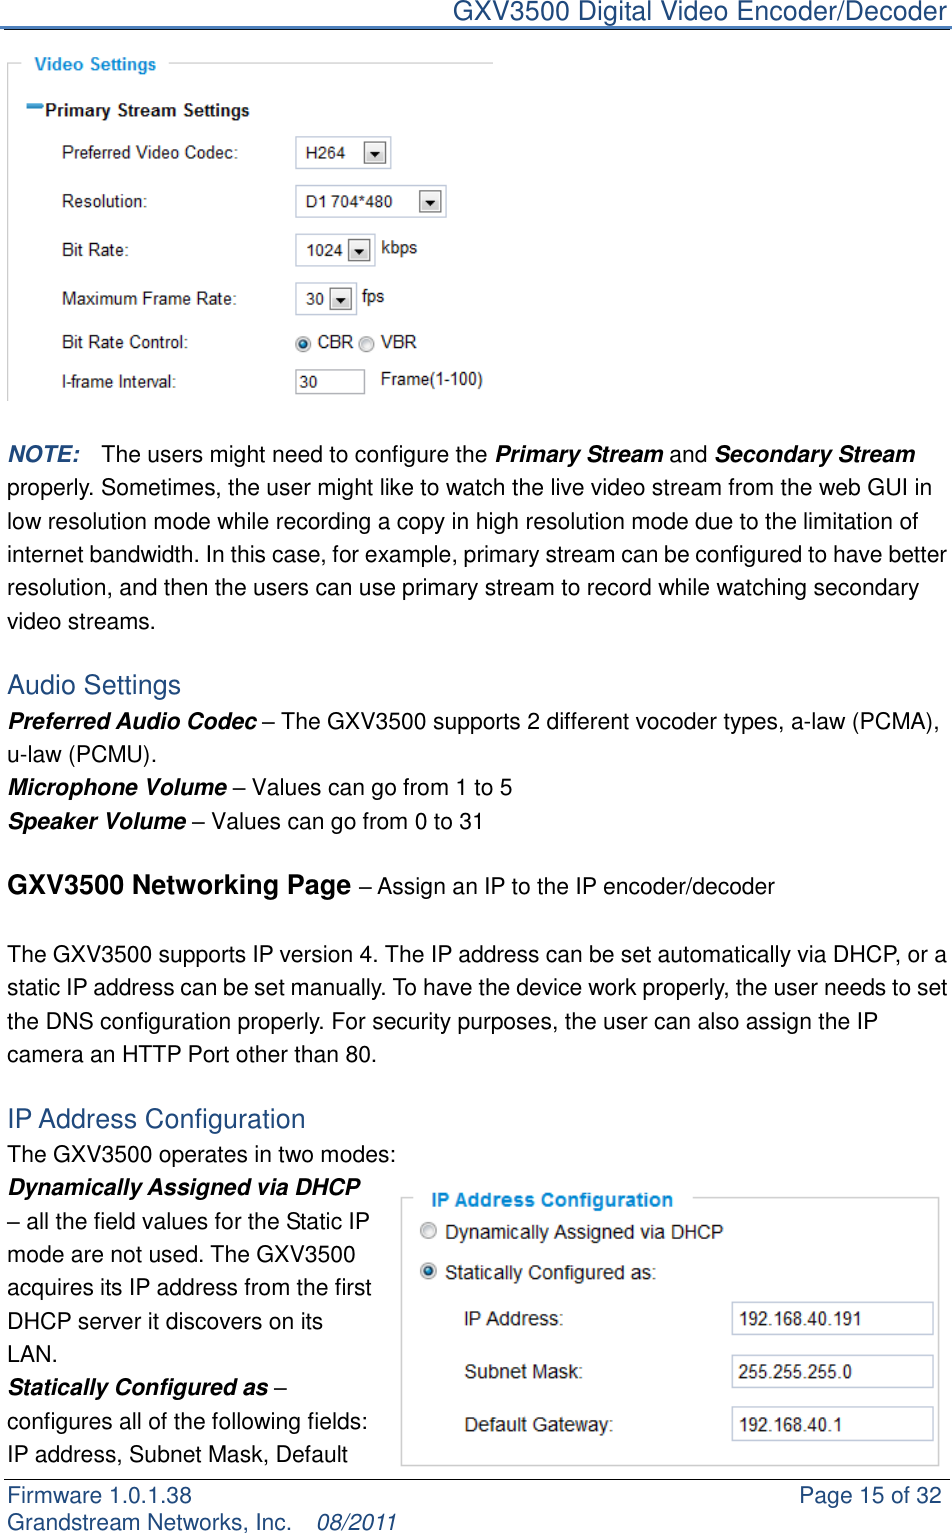     GXV3500 Digital Video Encoder/Decoder Firmware 1.0.1.38                                                     Page 15 of 32     Grandstream Networks, Inc.  08/2011    NOTE:    The users might need to configure the Primary Stream and Secondary Stream properly. Sometimes, the user might like to watch the live video stream from the web GUI in low resolution mode while recording a copy in high resolution mode due to the limitation of internet bandwidth. In this case, for example, primary stream can be configured to have better resolution, and then the users can use primary stream to record while watching secondary video streams.    Audio Settings Preferred Audio Codec – The GXV3500 supports 2 different vocoder types, a-law (PCMA), u-law (PCMU). Microphone Volume – Values can go from 1 to 5 Speaker Volume – Values can go from 0 to 31  GXV3500 Networking Page – Assign an IP to the IP encoder/decoder  The GXV3500 supports IP version 4. The IP address can be set automatically via DHCP, or a static IP address can be set manually. To have the device work properly, the user needs to set the DNS configuration properly. For security purposes, the user can also assign the IP camera an HTTP Port other than 80.  IP Address Configuration The GXV3500 operates in two modes: Dynamically Assigned via DHCP – all the field values for the Static IP mode are not used. The GXV3500 acquires its IP address from the first DHCP server it discovers on its LAN.   Statically Configured as – configures all of the following fields: IP address, Subnet Mask, Default 